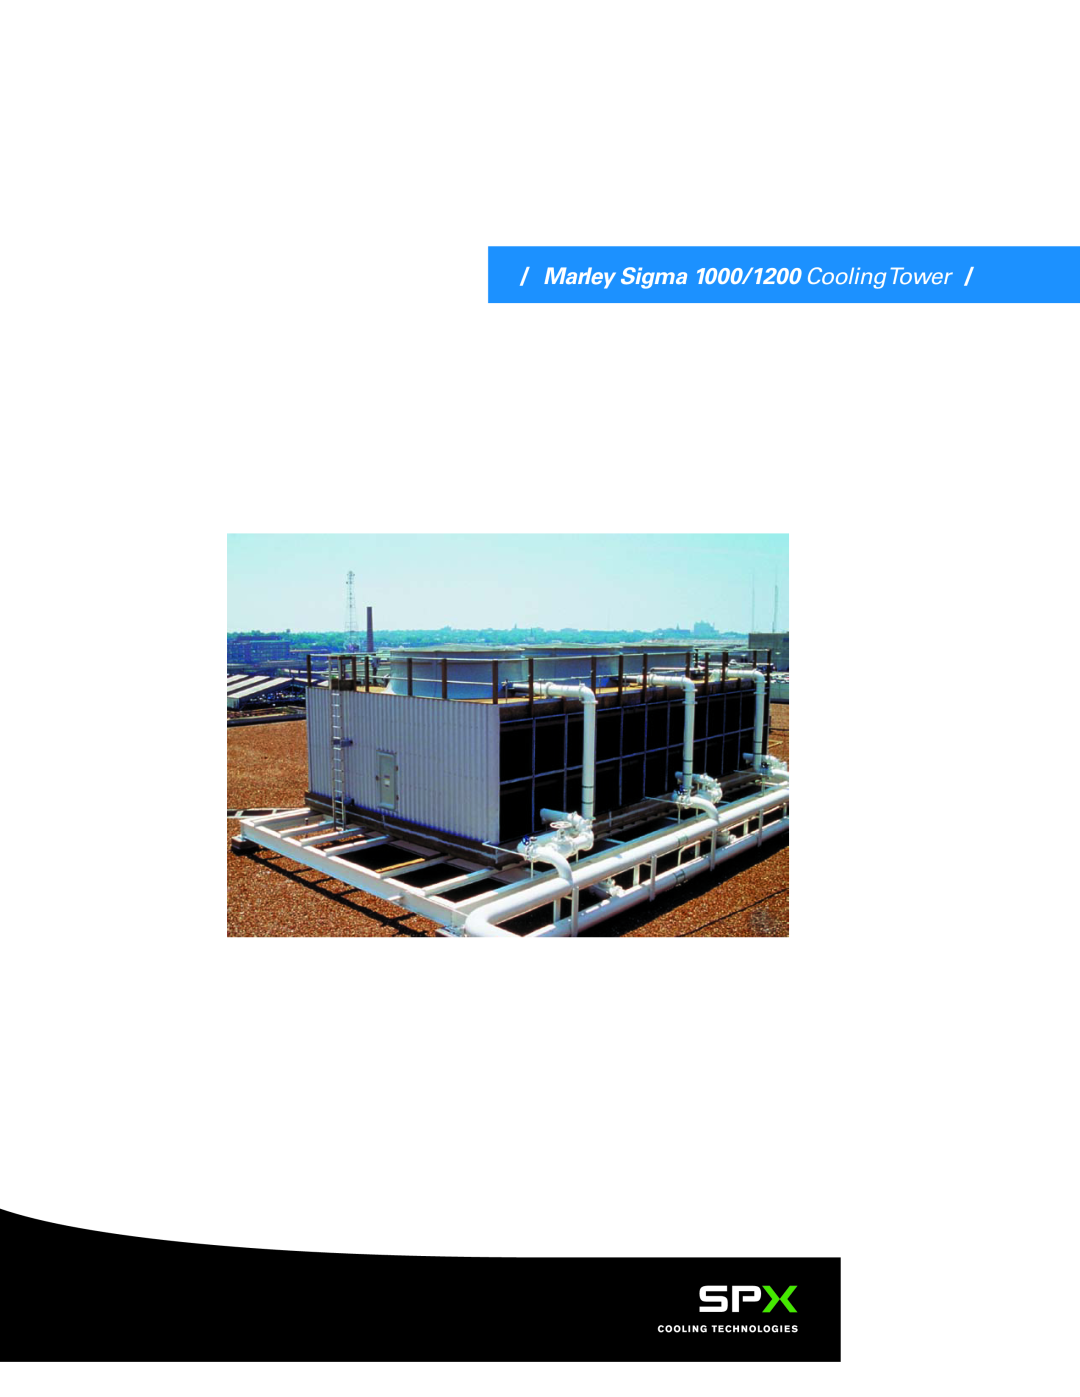 SPX Cooling Technologies manual Marley Sigma 1000/1200 CoolingTower 